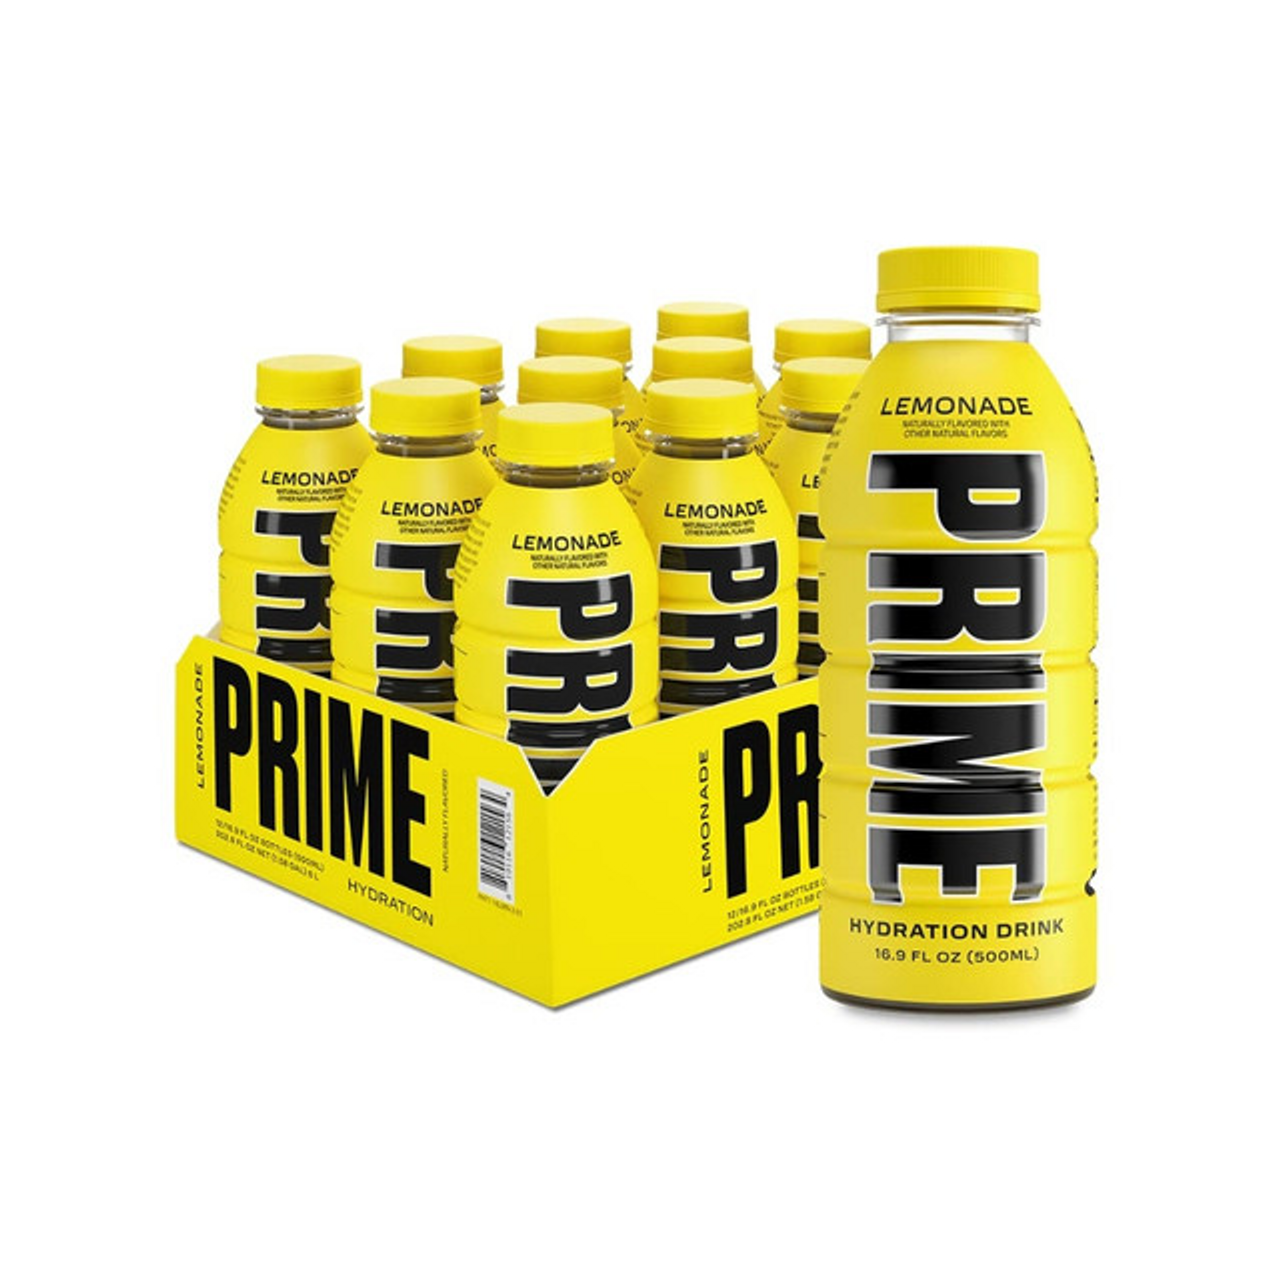 PRIME Hydration is coming to Switzerland later this year